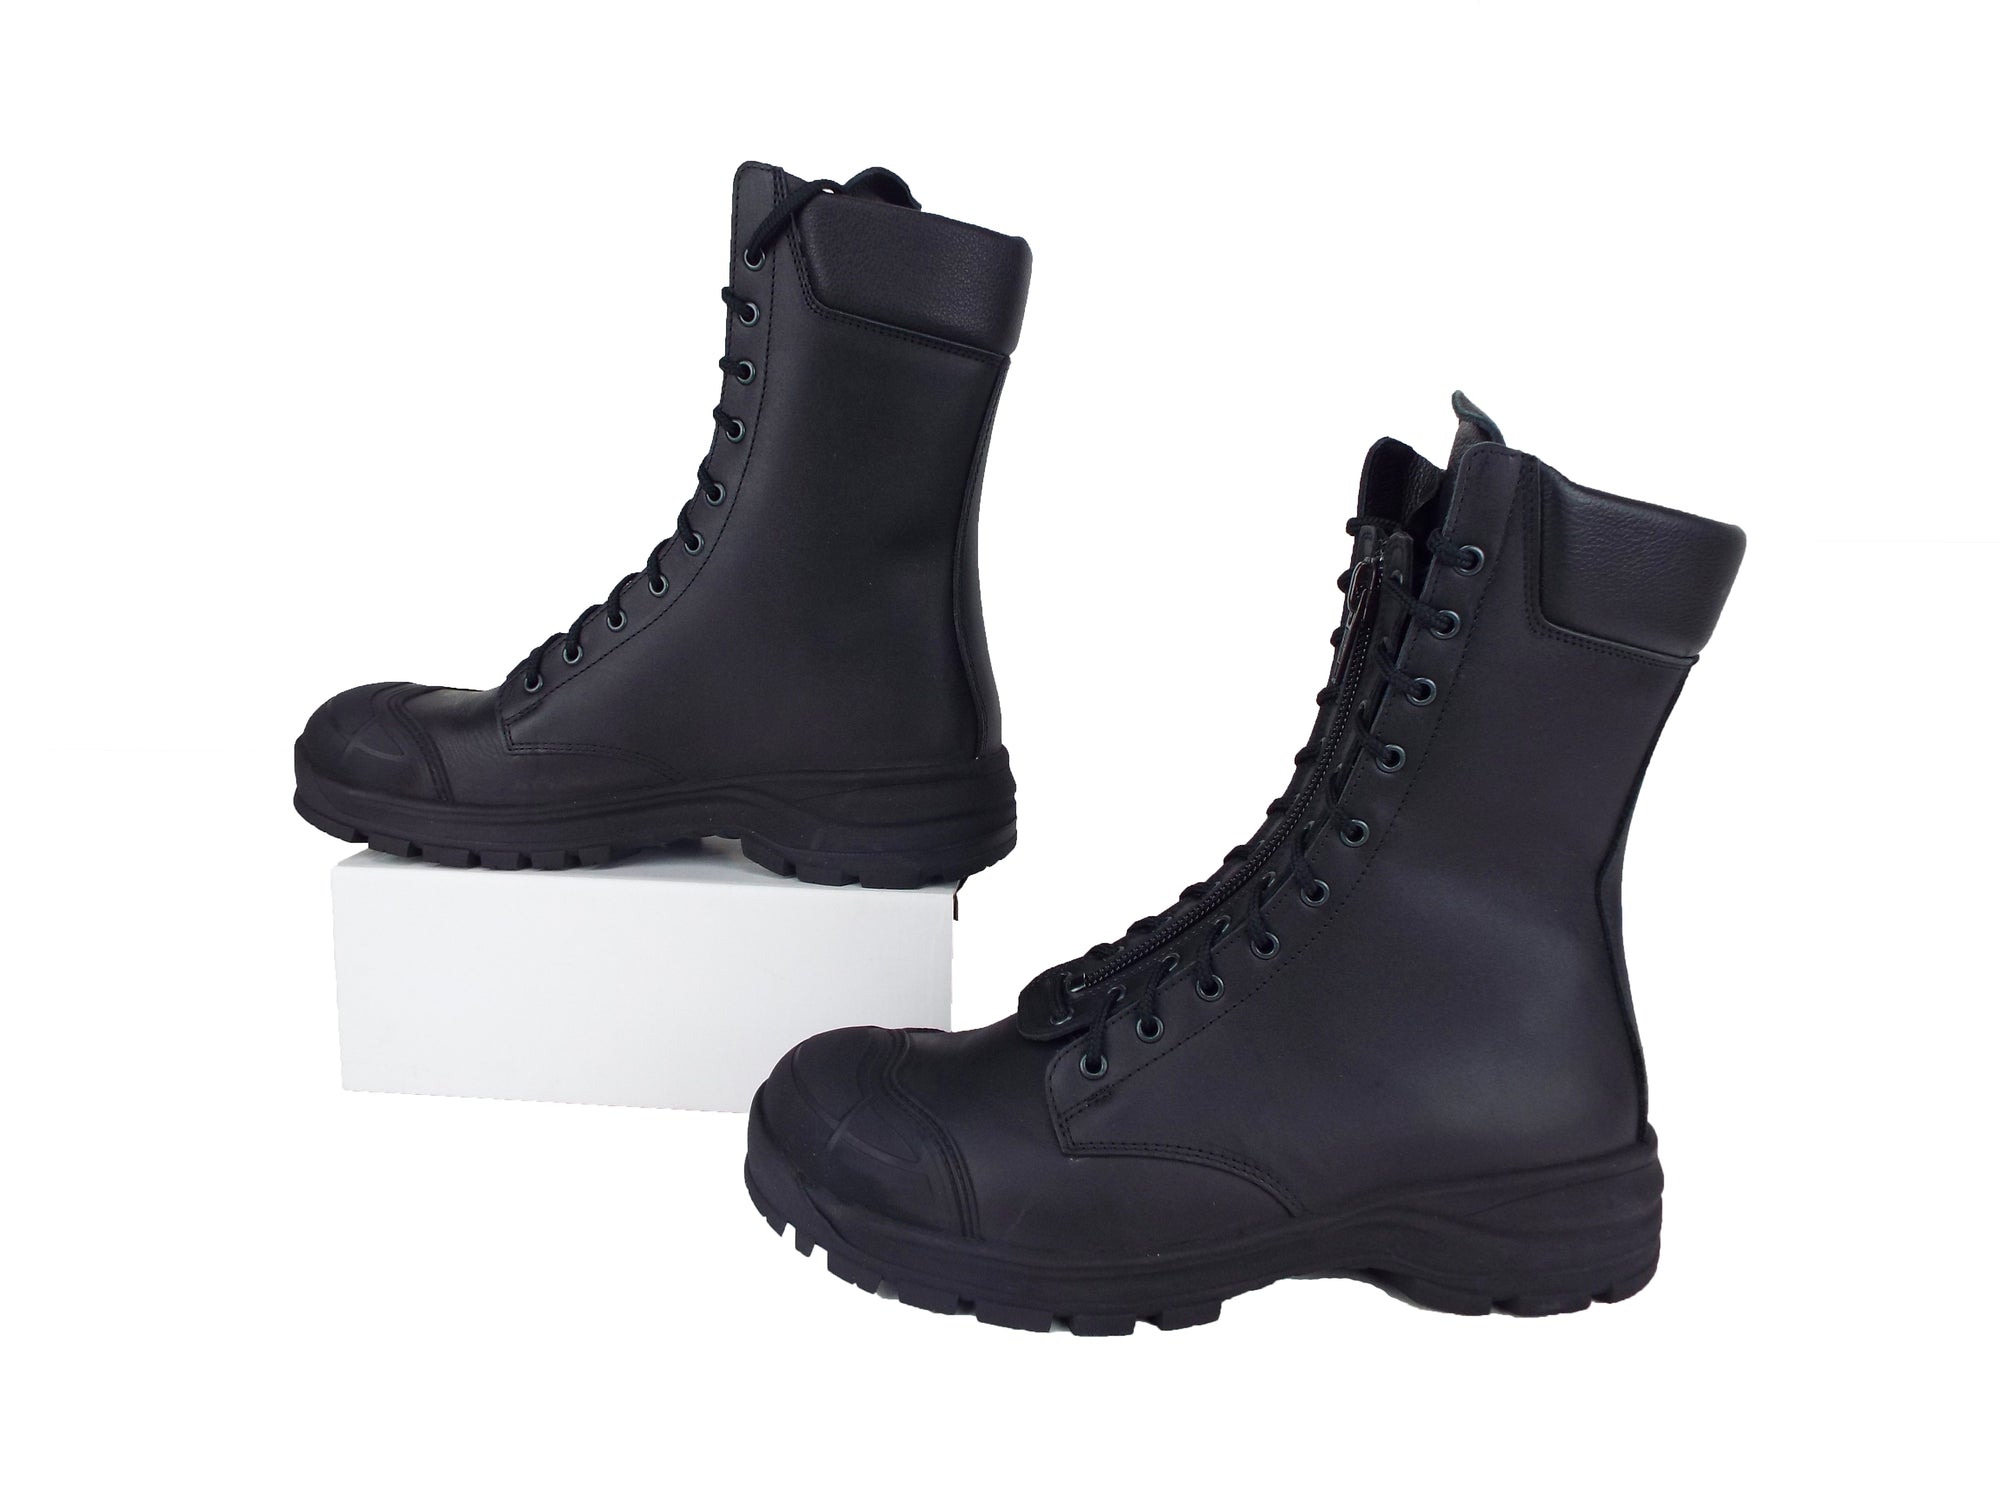 Dutch Army - Combat Boots - Steel Toe and Rubber Guard - Unissued